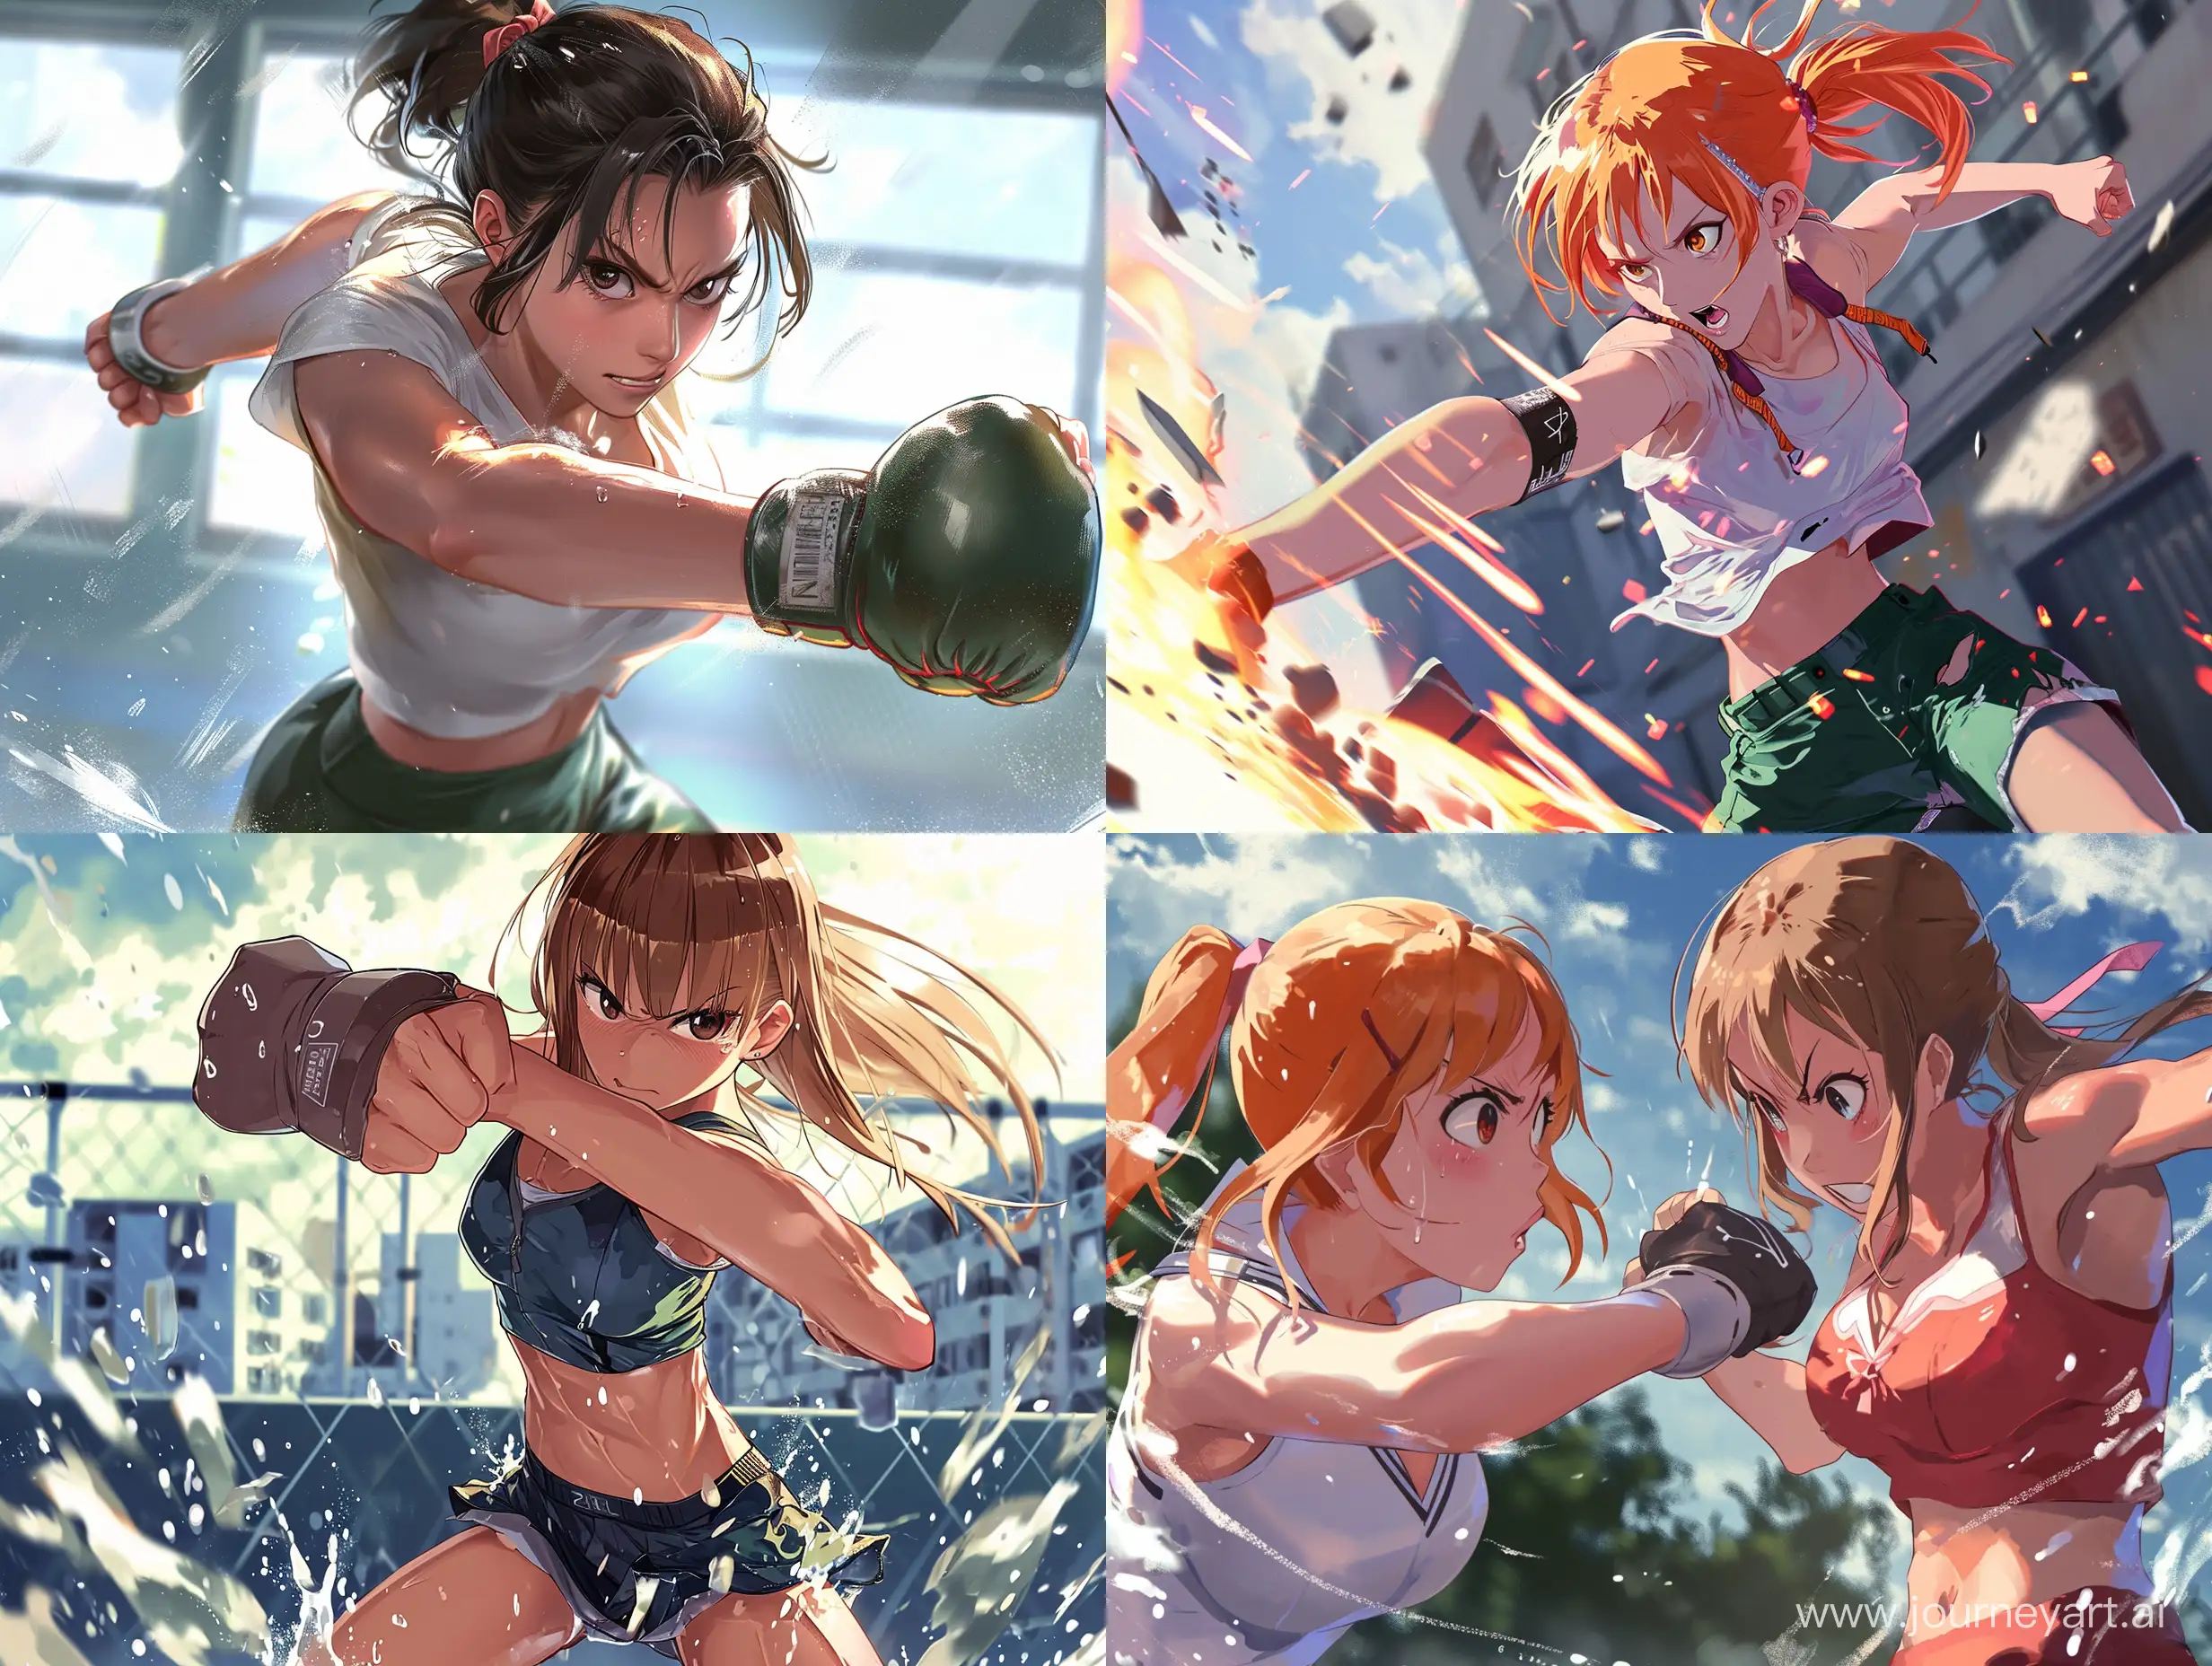 Cute-Anime-Girl-in-Action-with-Motion-Effects-Best-Quality-Digital-Art